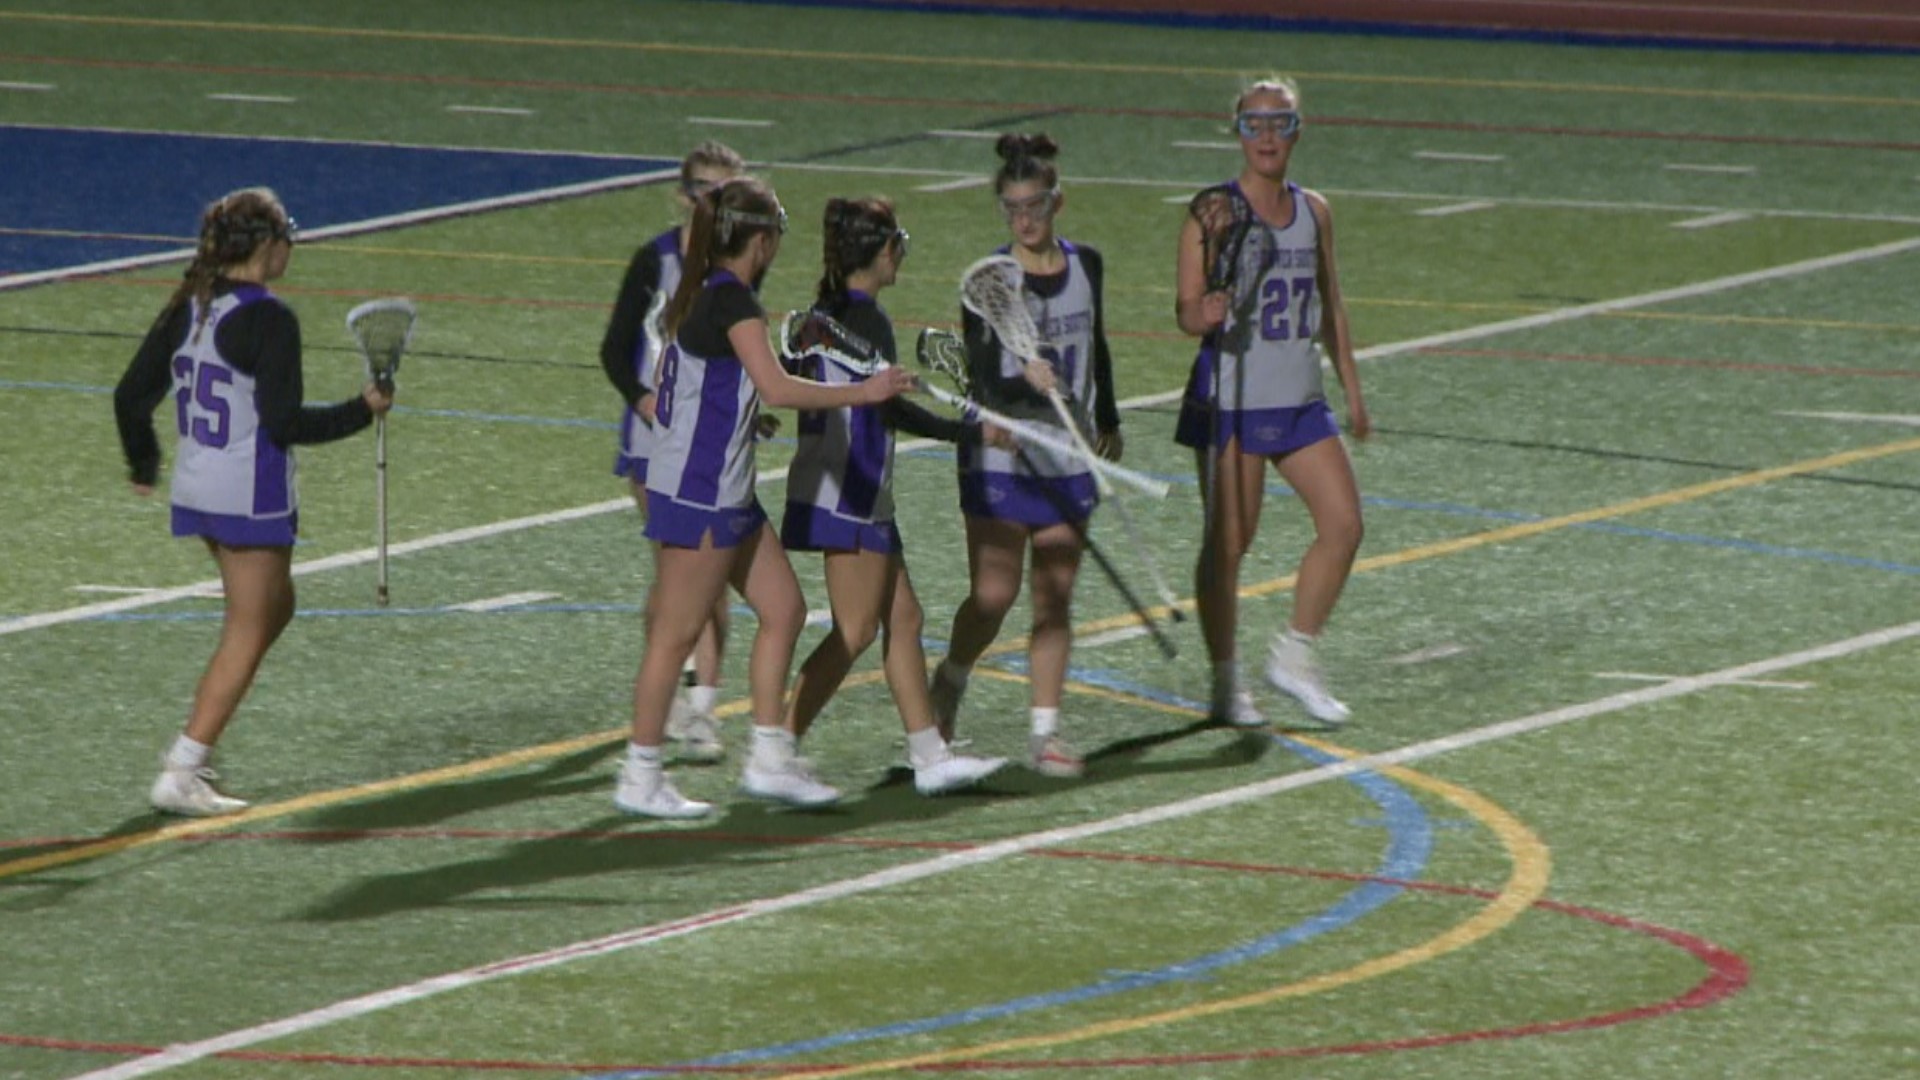 The Ravens held off the Eagles' comeback attempt in a 12-10 victory Tuesday night.